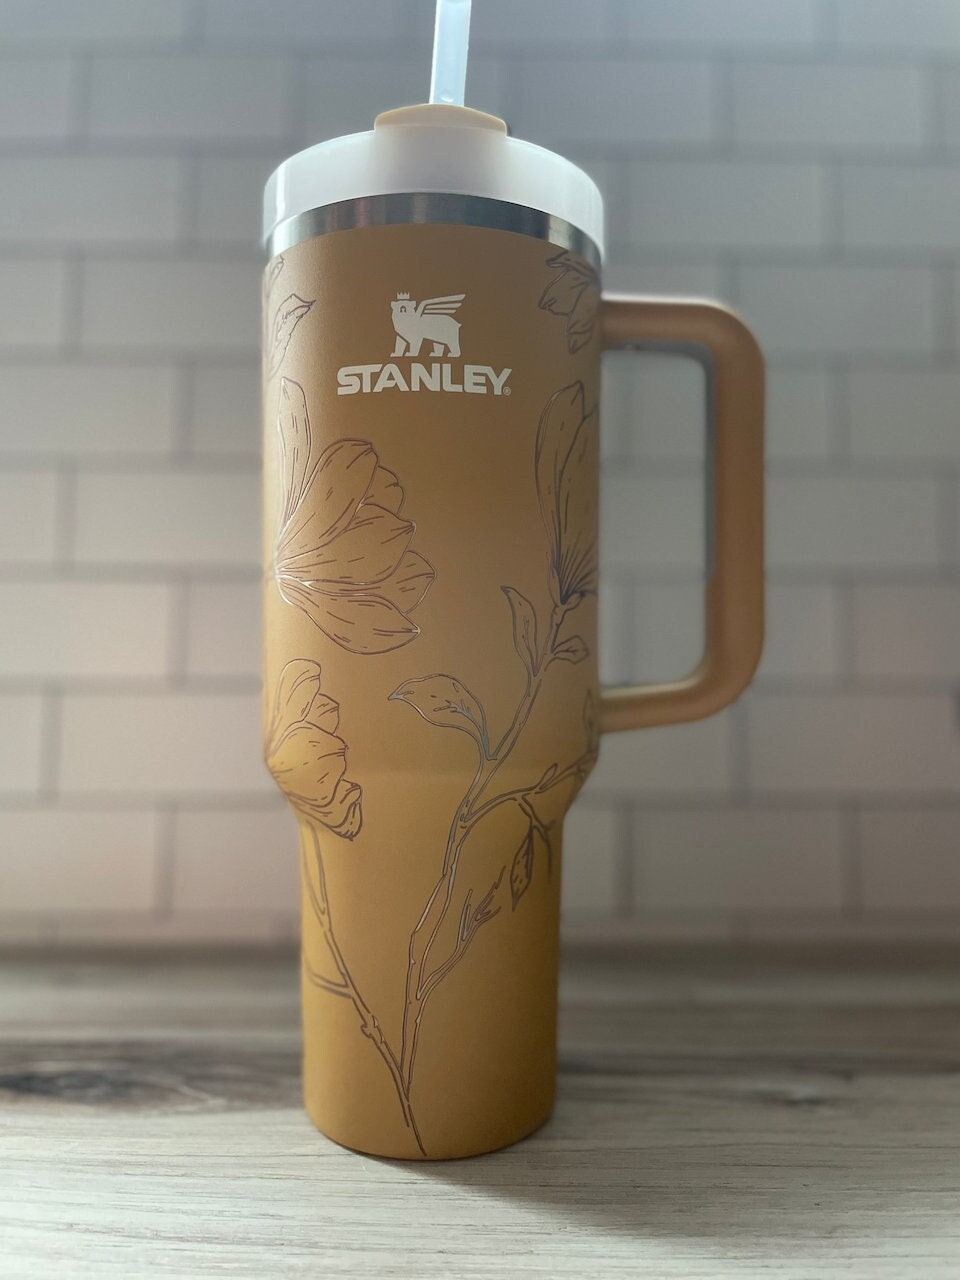 Creamish/ brown Stanley cup. 40 oz